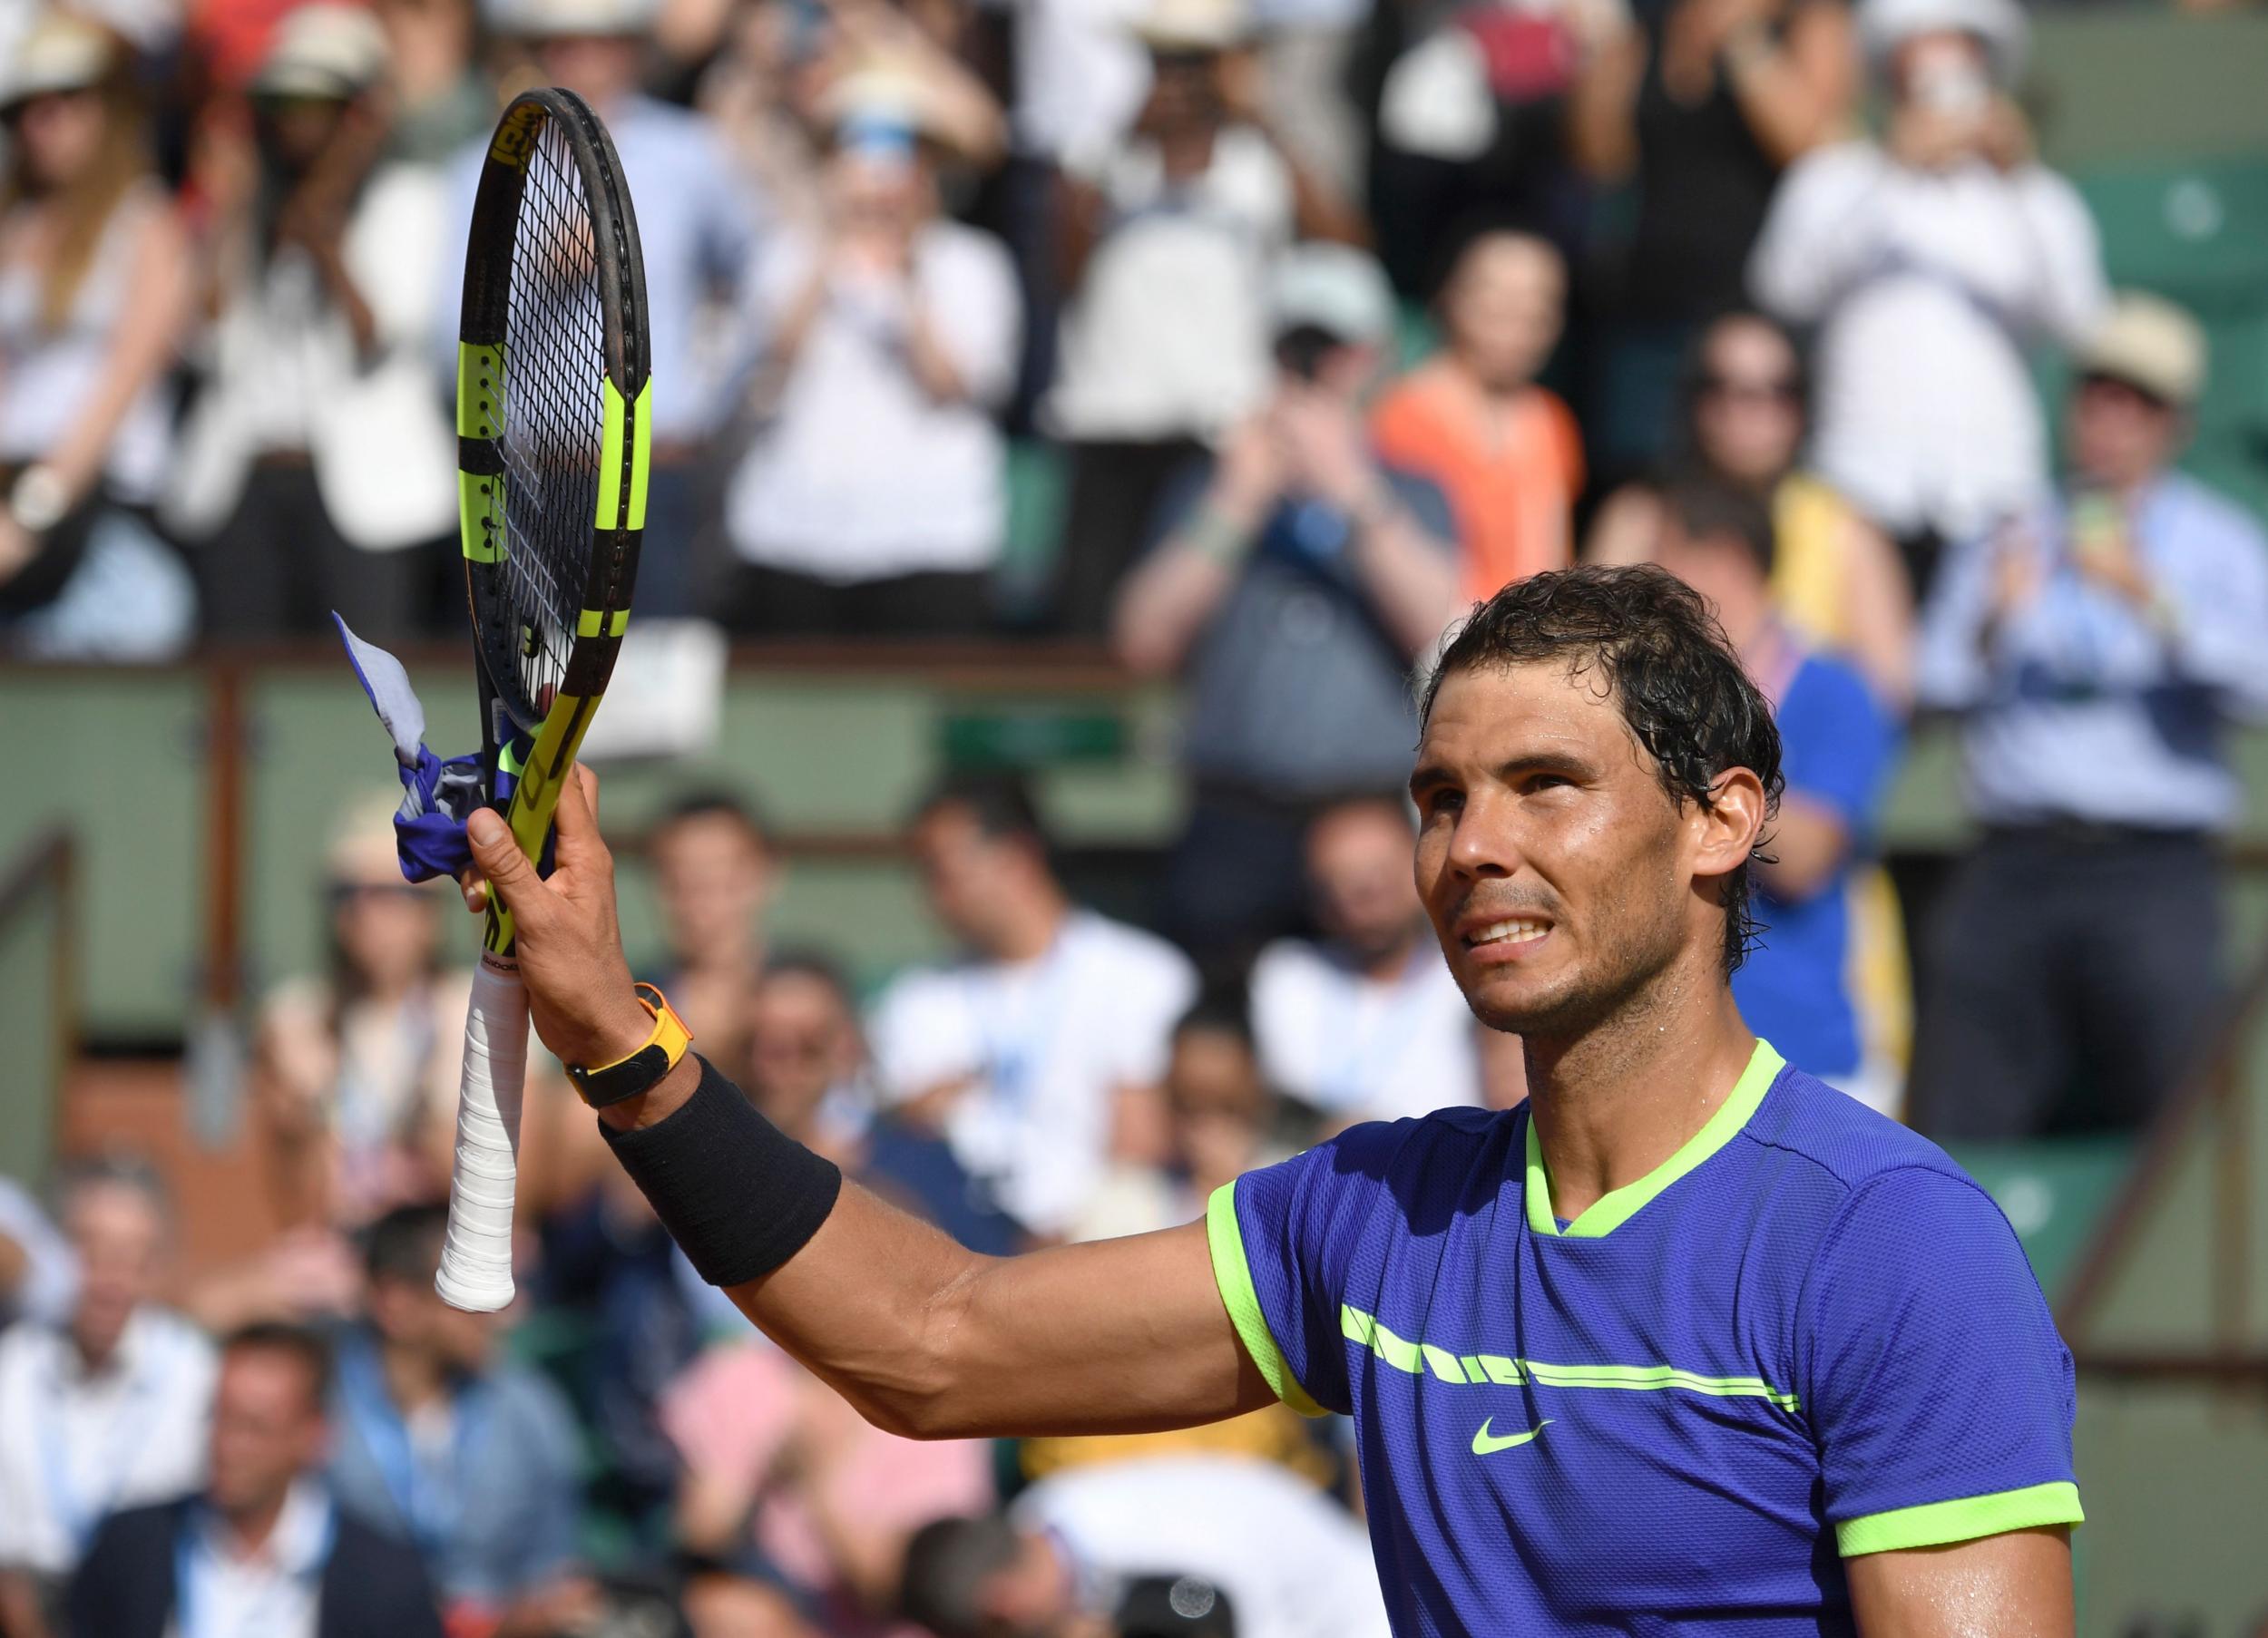 Nadal has breezed through his first two matches